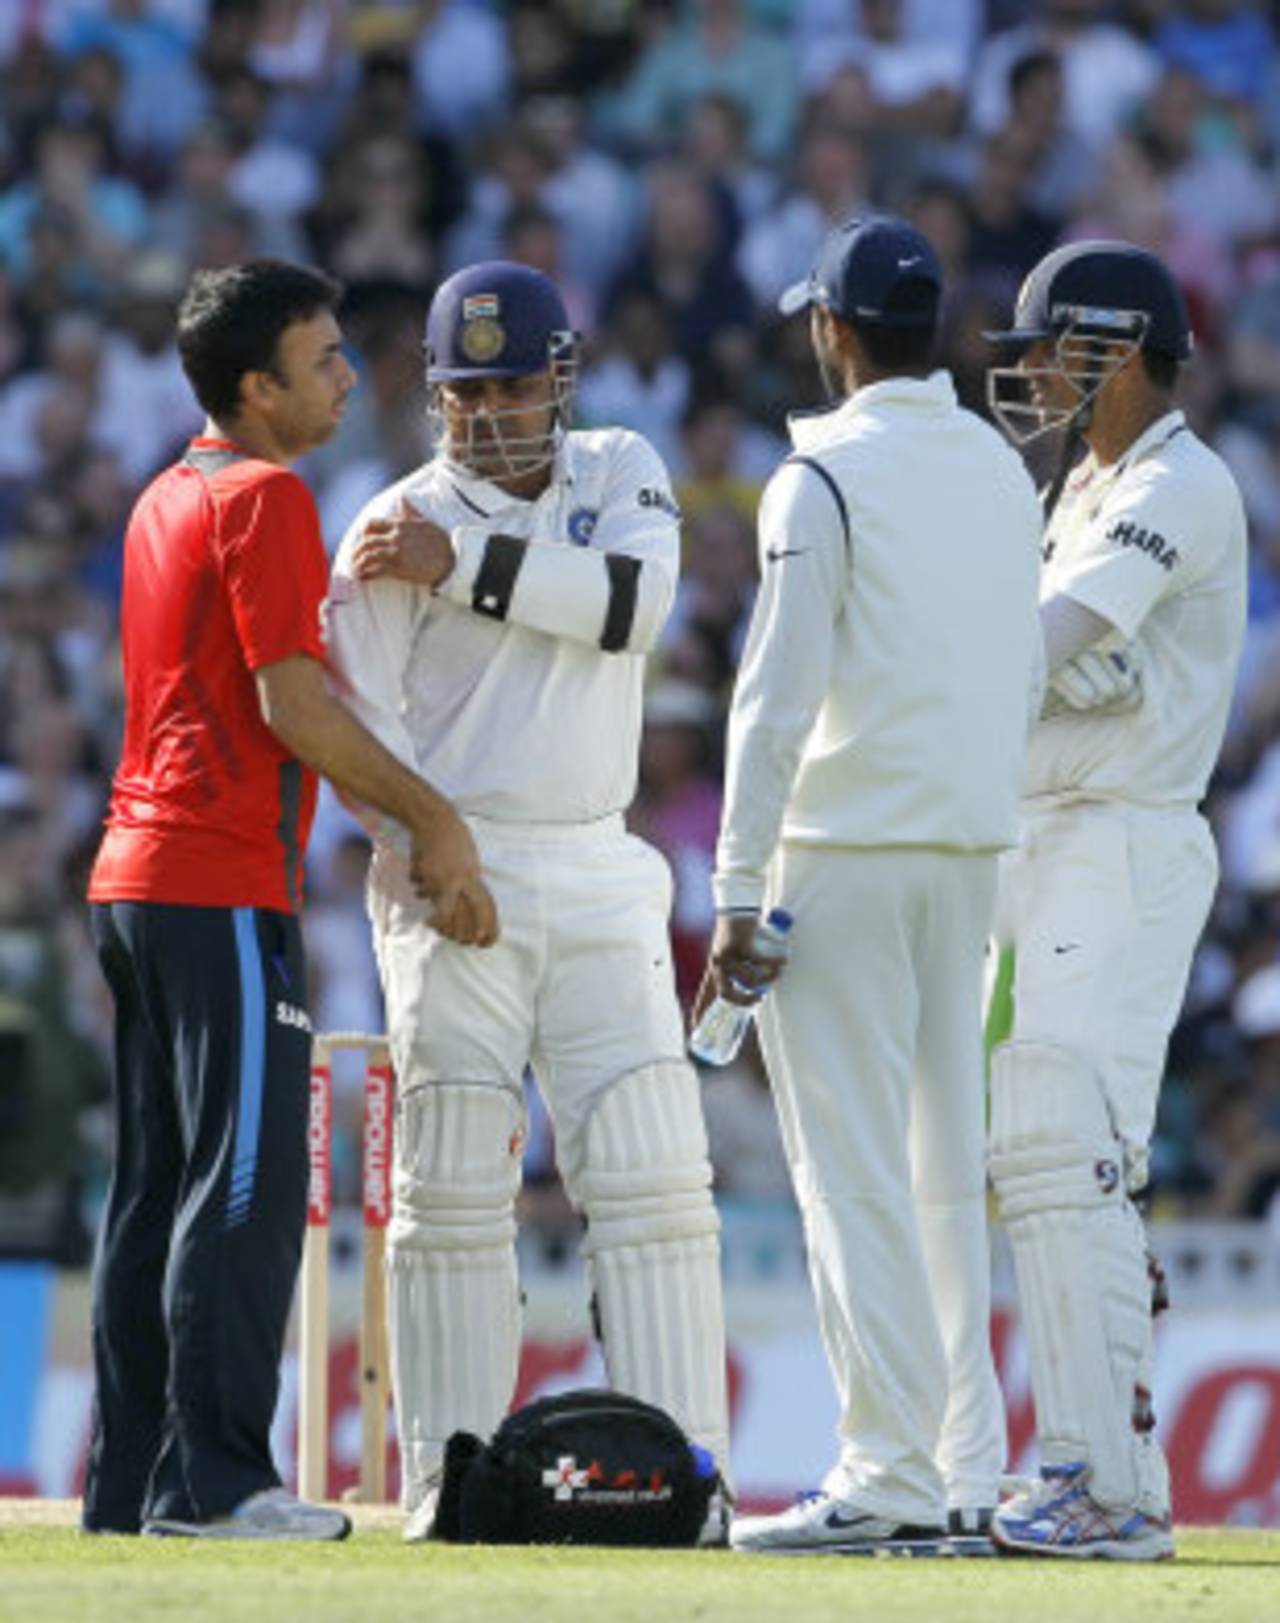 Virender Sehwag experiences some discomfort in his shoulder, England v India, 4th Test, The Oval, 4th day, August 21, 2011